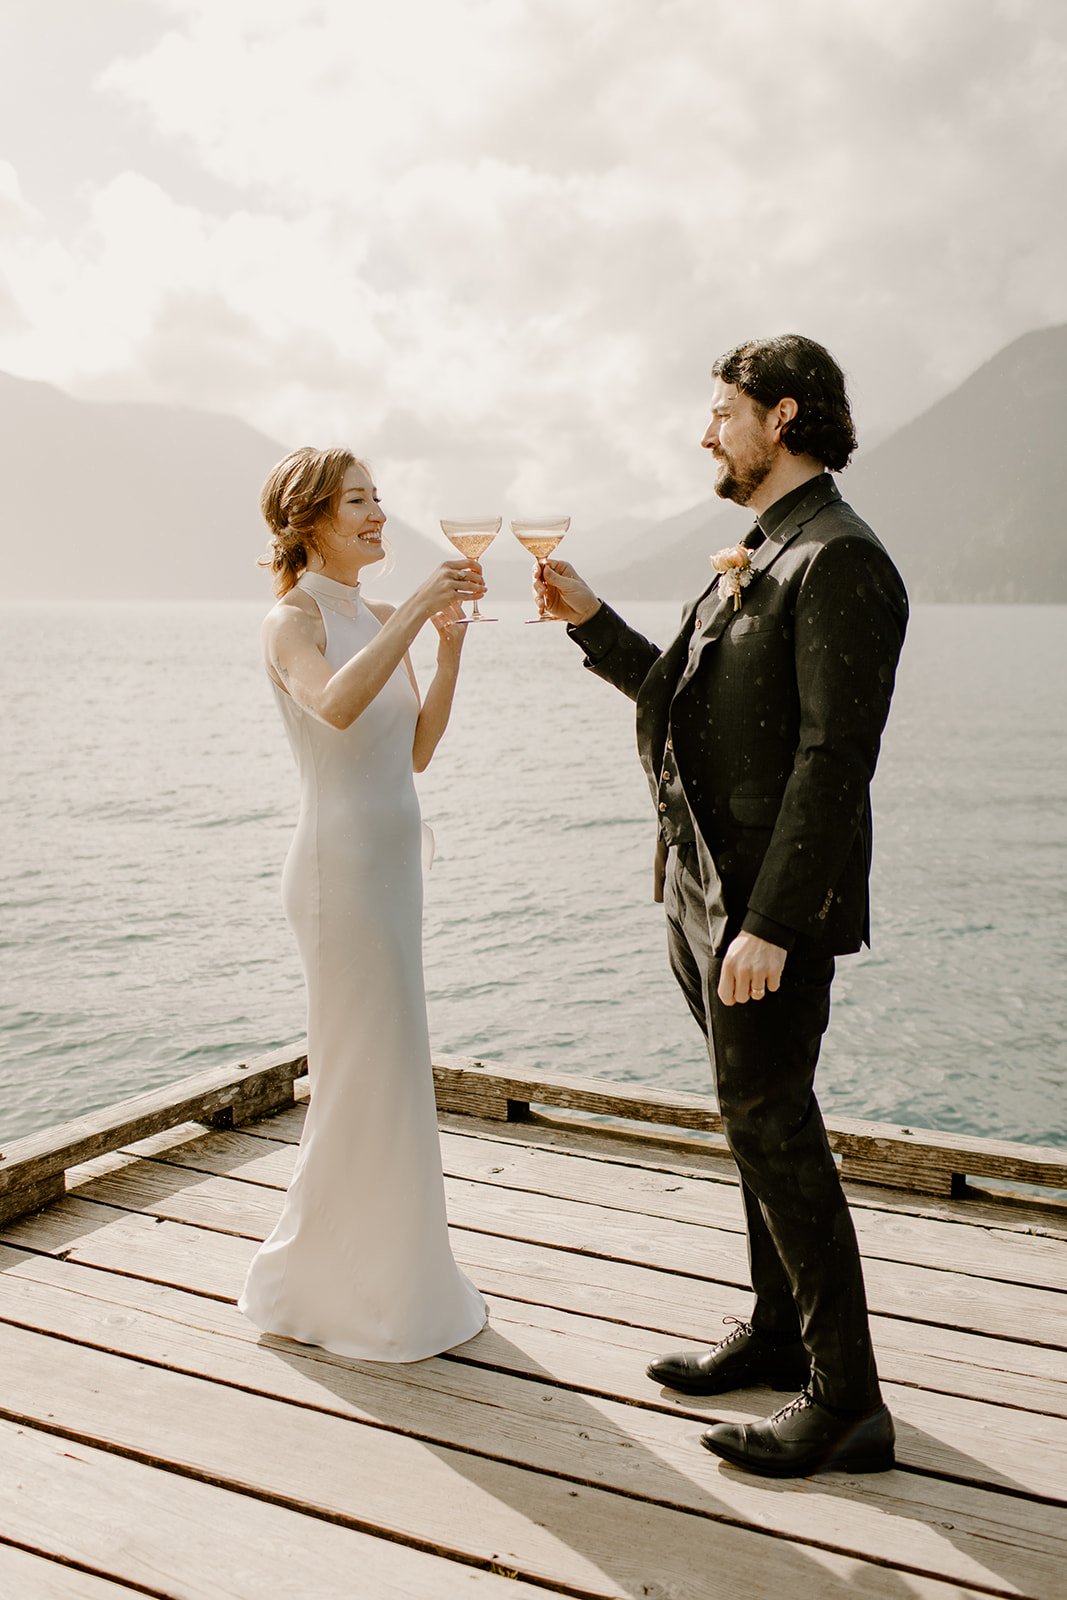 Bride and Groom standing on dock at lake crescent cheering with a glass of champagne